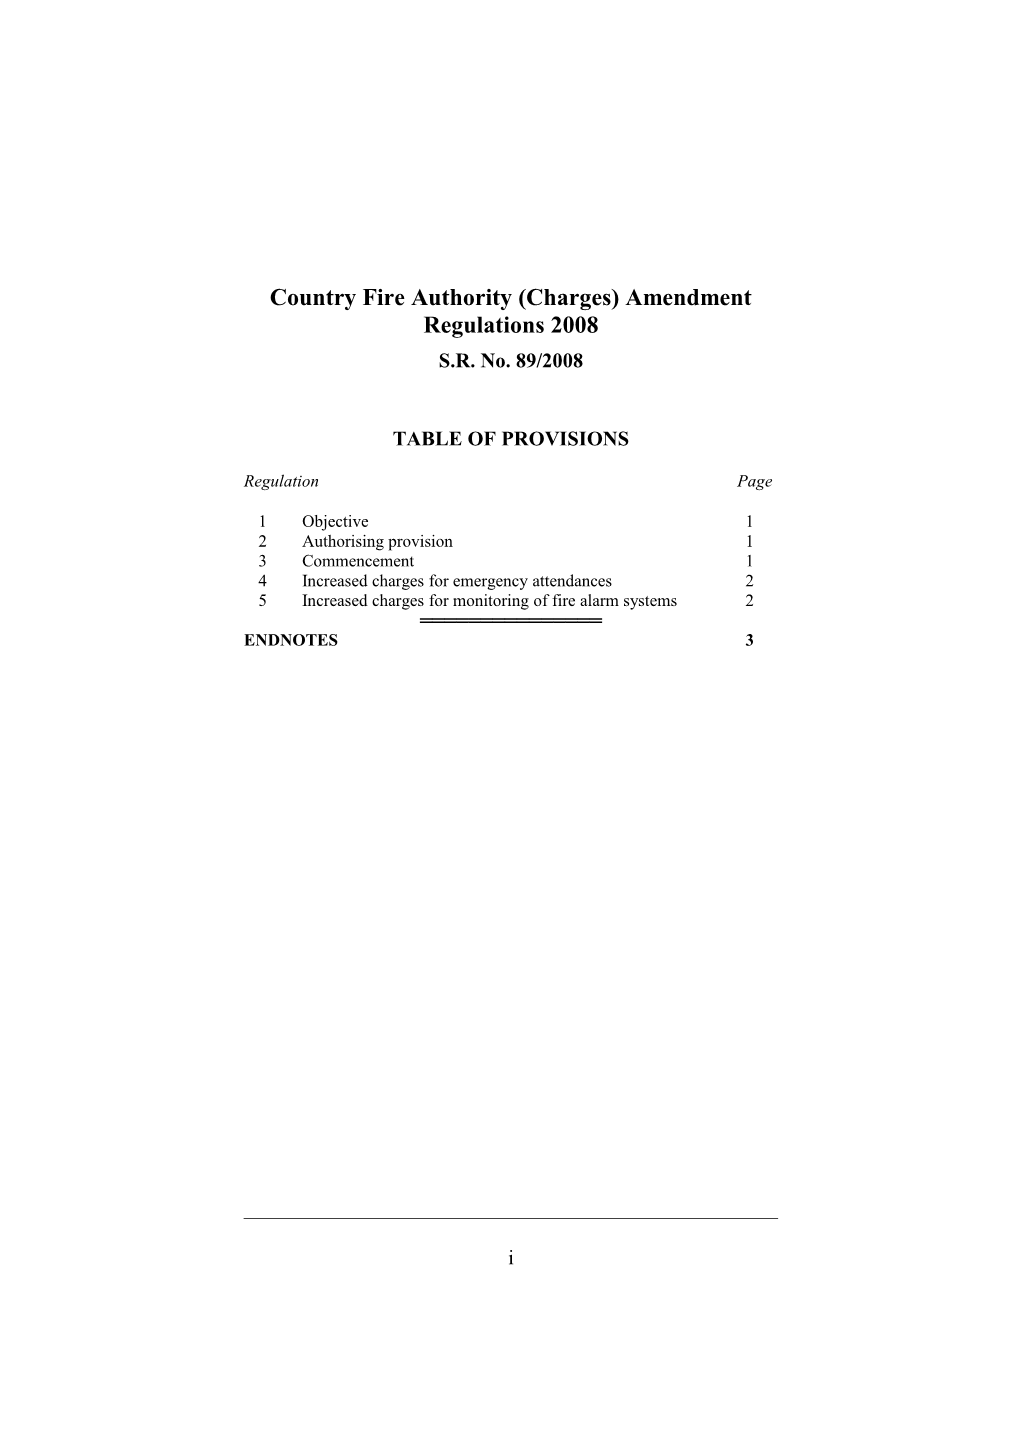 Country Fire Authority (Charges) Amendment Regulations 2008